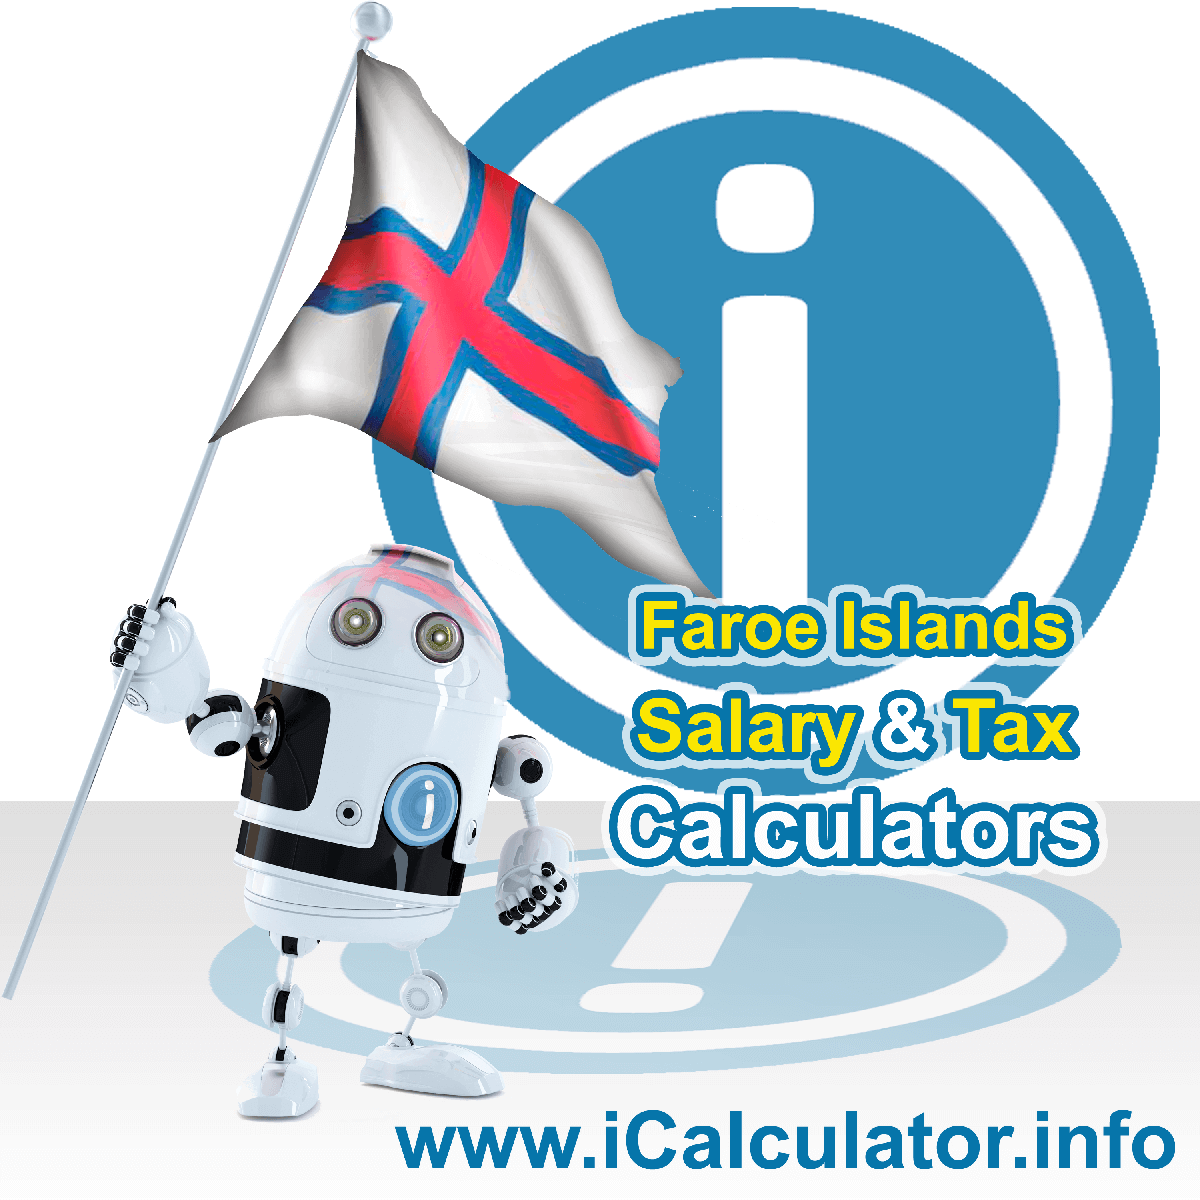 Faroe Islands Wage Calculator. This image shows the Faroe Islands flag and information relating to the tax formula for the Faroe Islands Tax Calculator